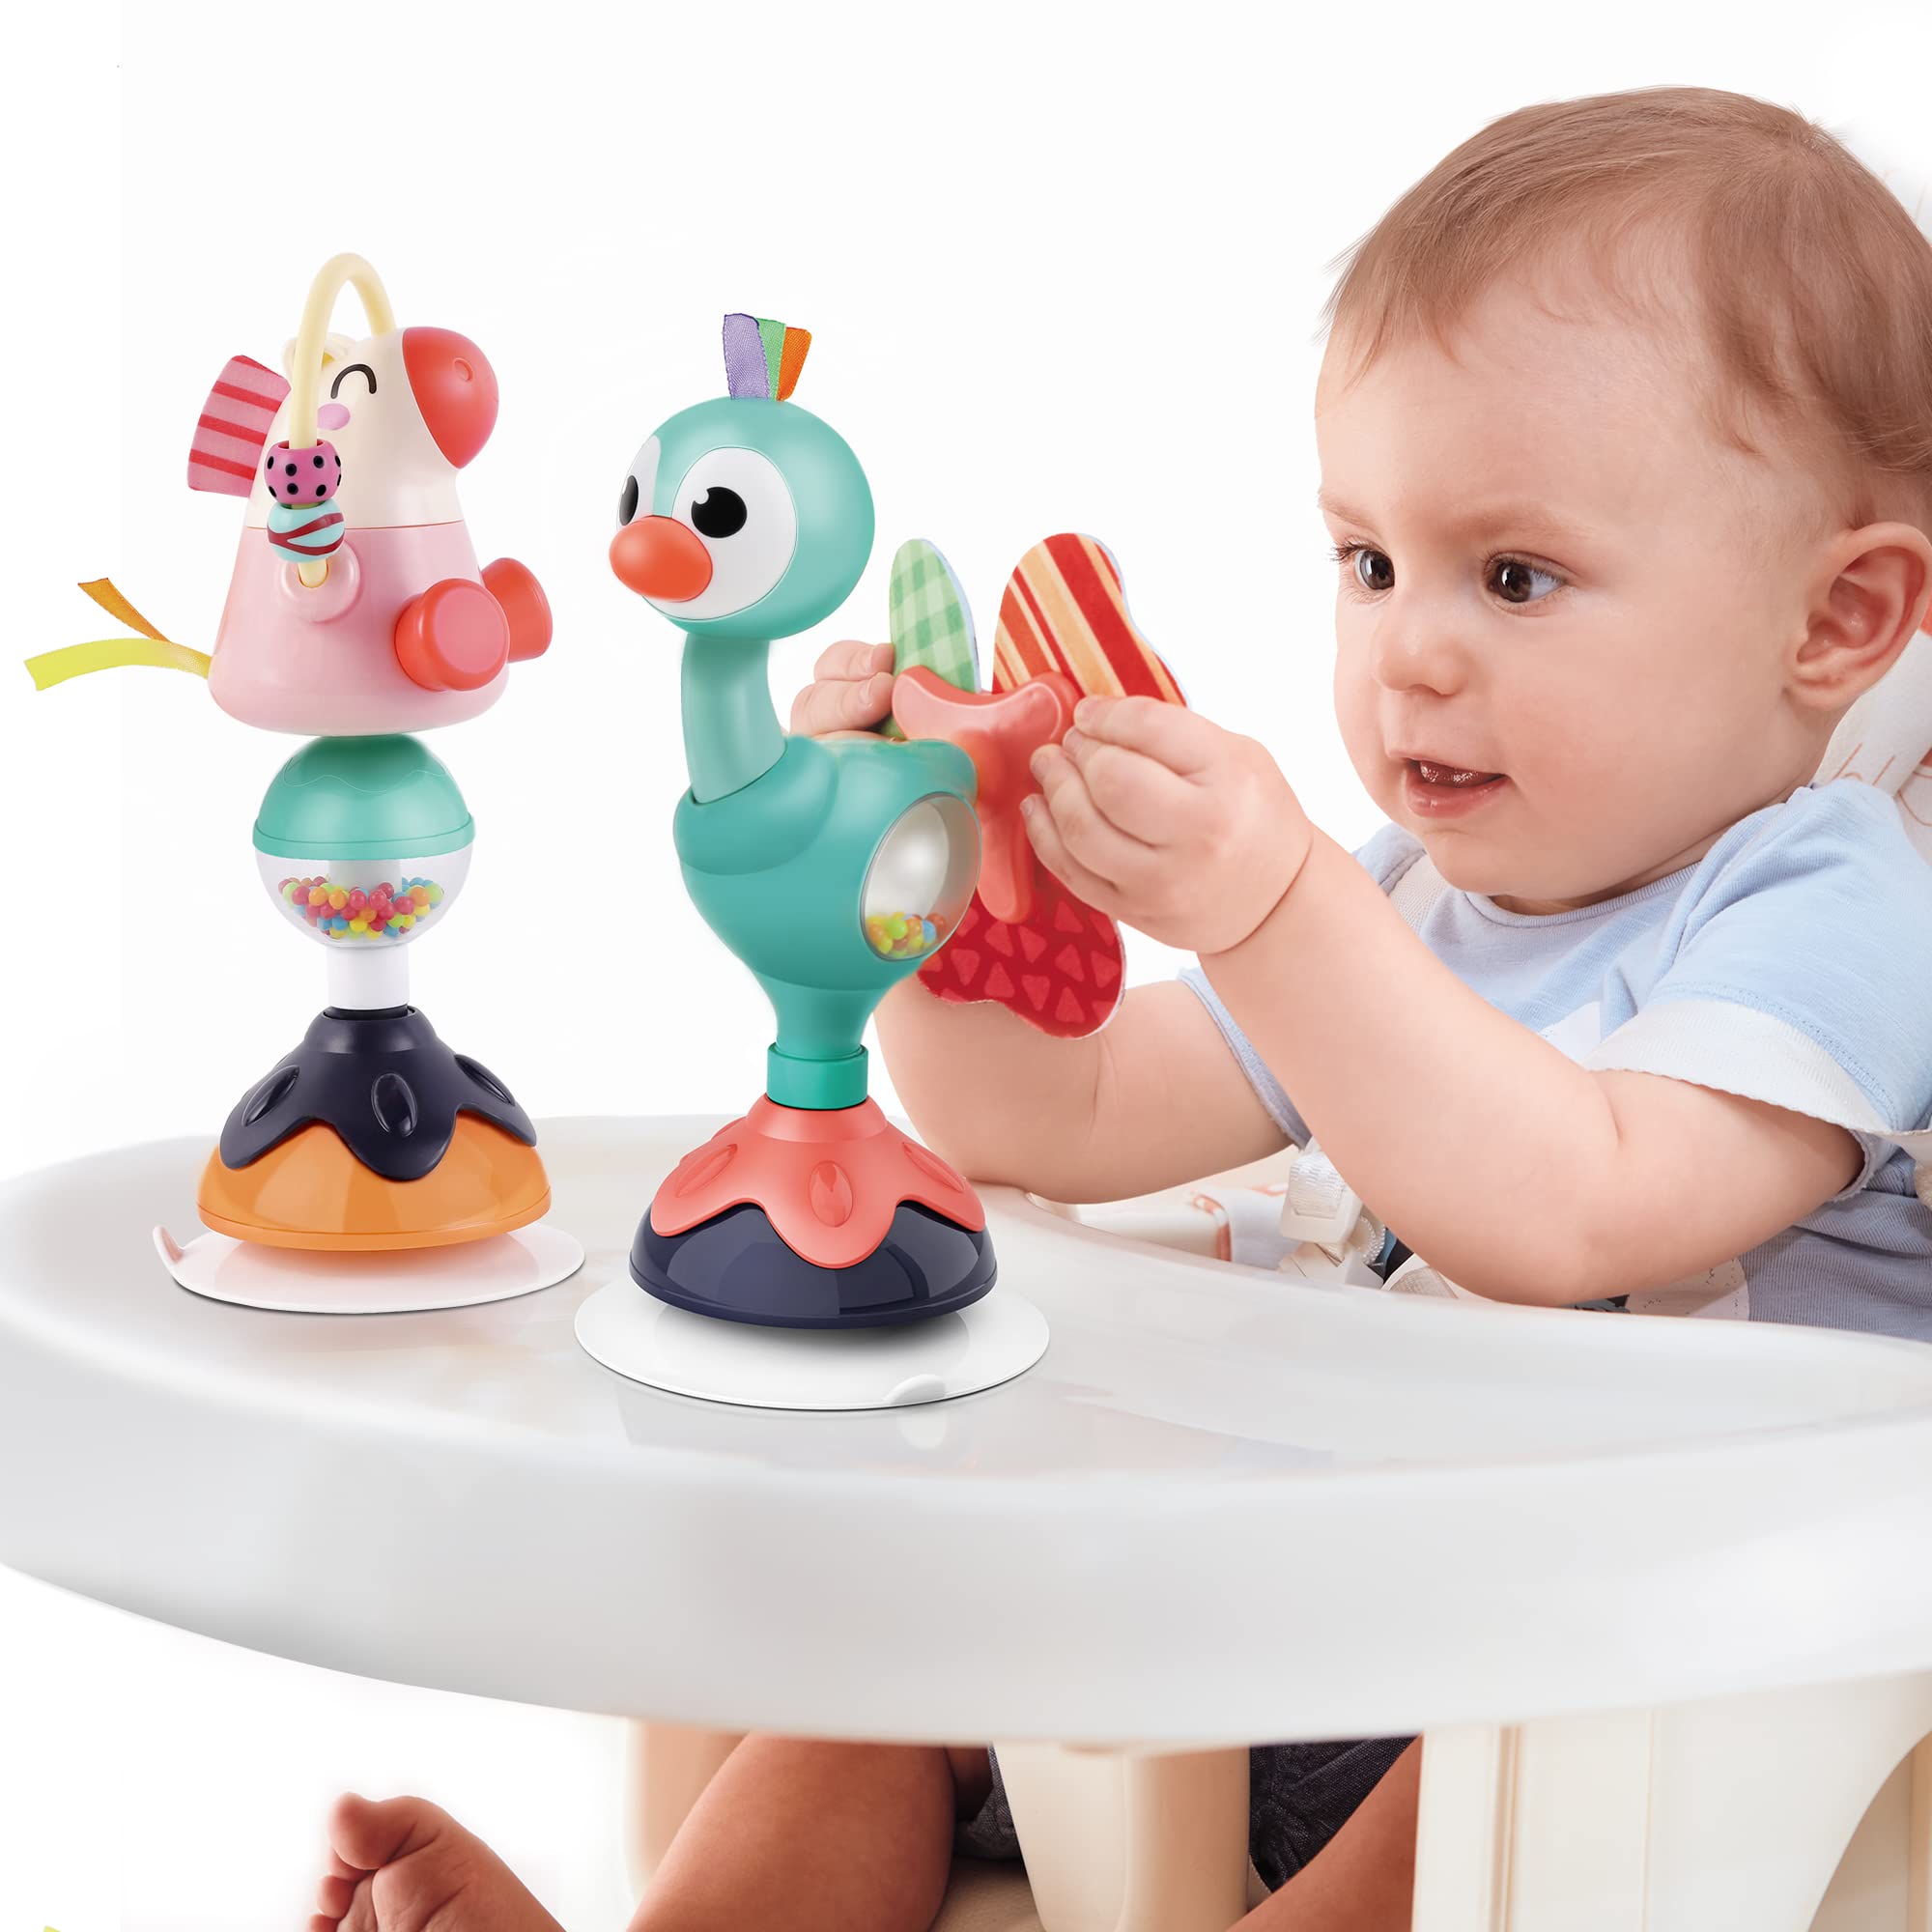 Baby Toys 6 to 12-18 Months Musical Activity Table Toy for 1 Year Old Boys  Girls